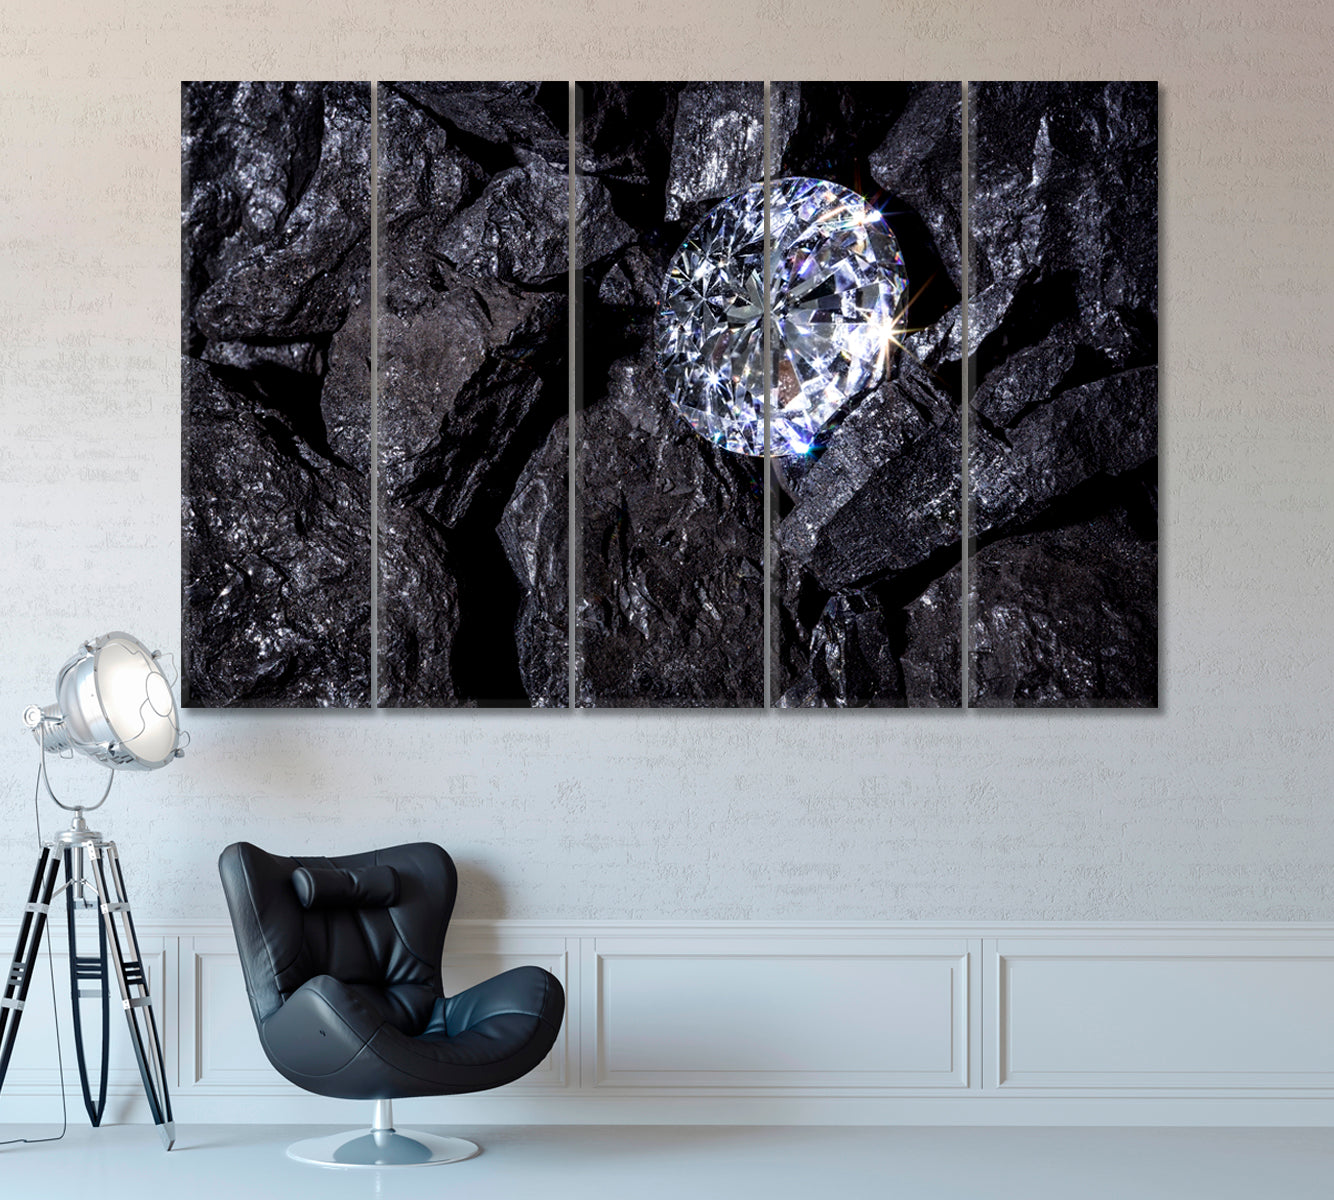 Diamond Among Pieces of Coal Canvas Print ArtLexy 5 Panels 36"x24" inches 